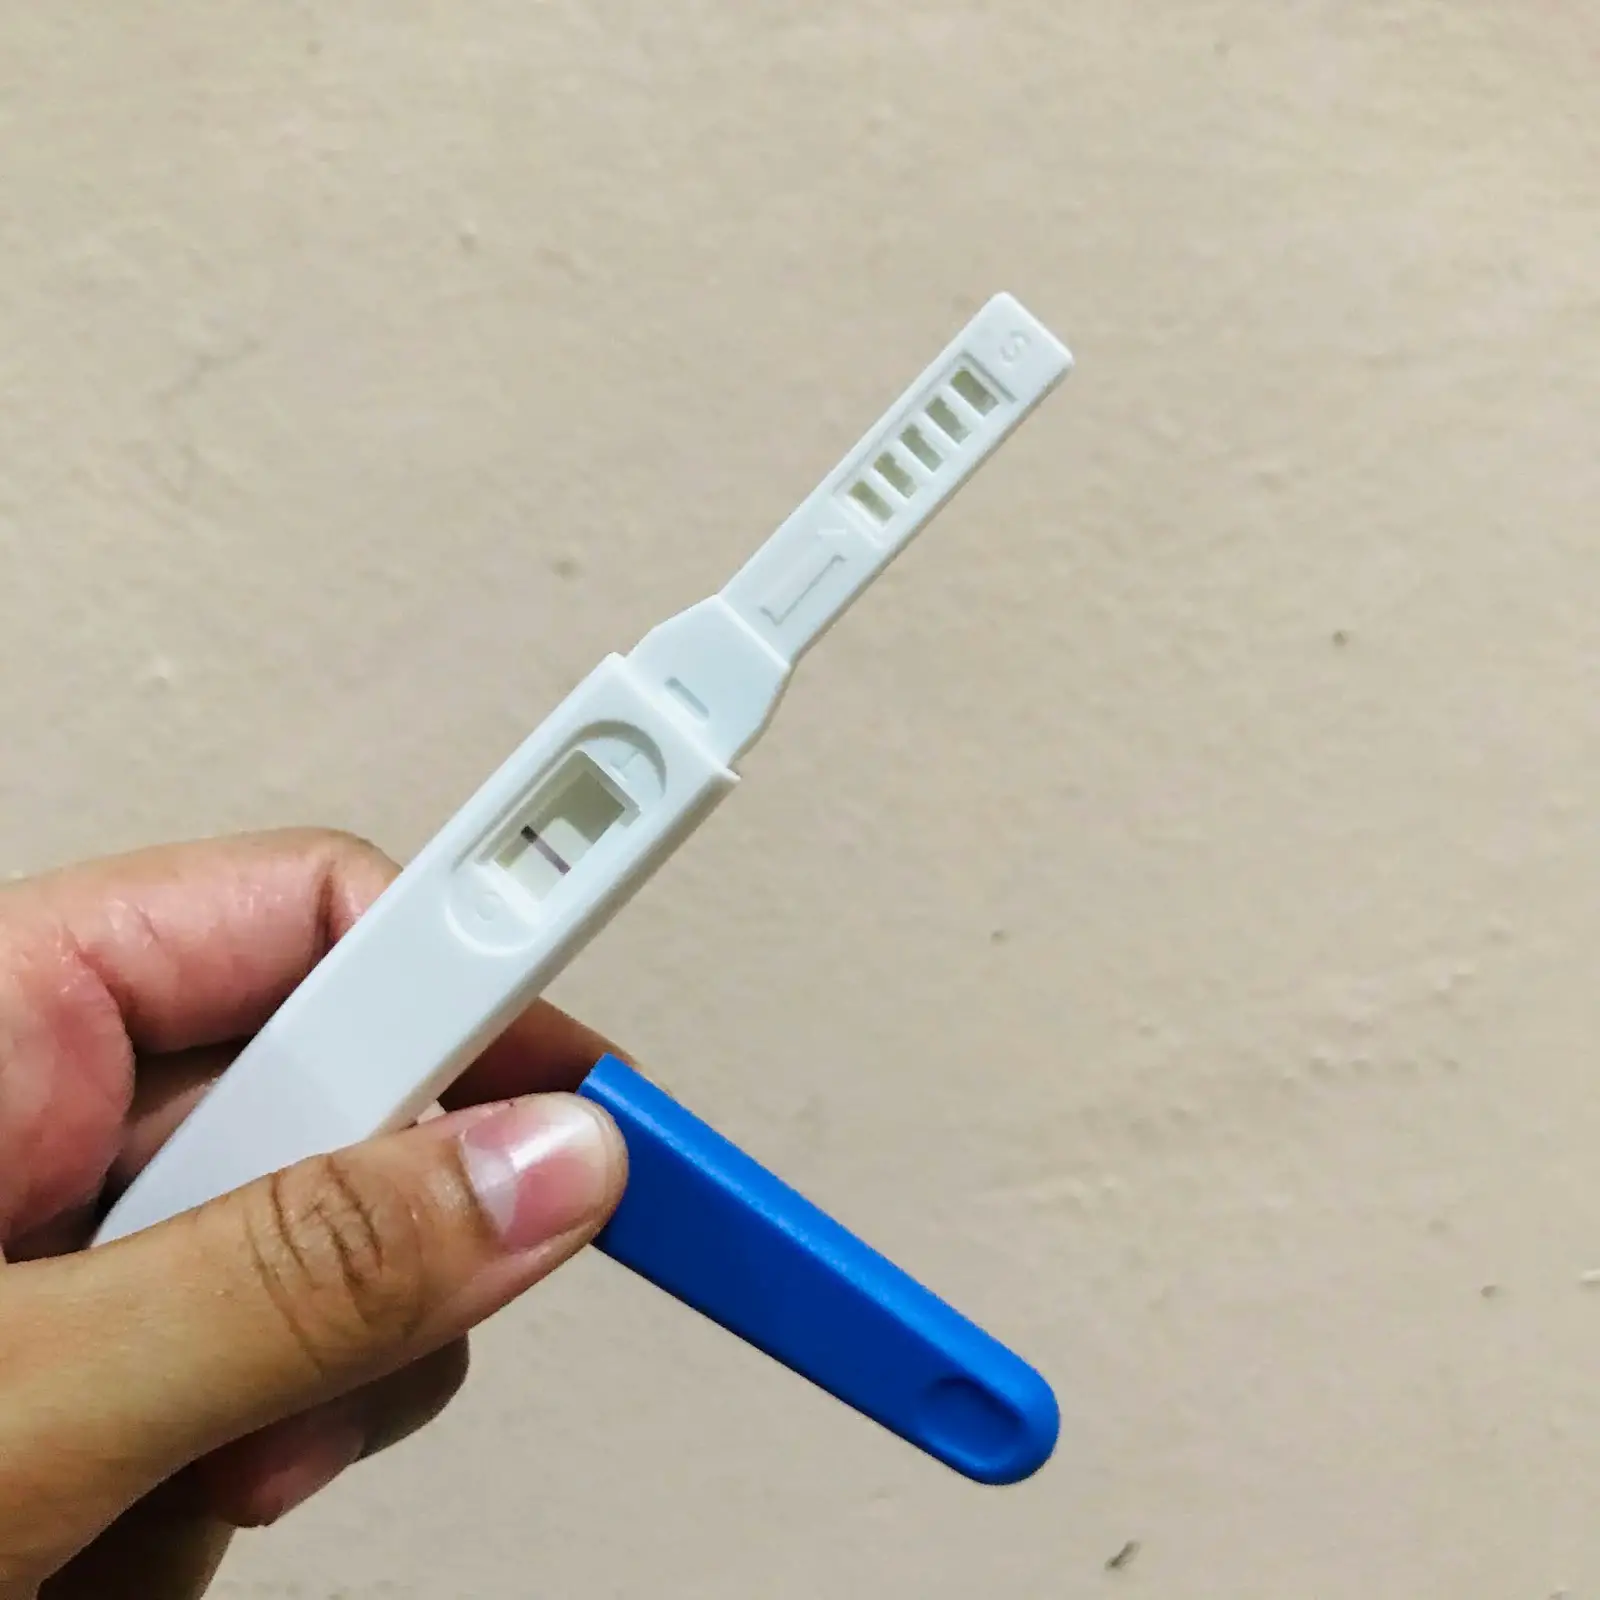 Plan your pregnancy with Asia Medic Early Detection Pregnancy Test ...